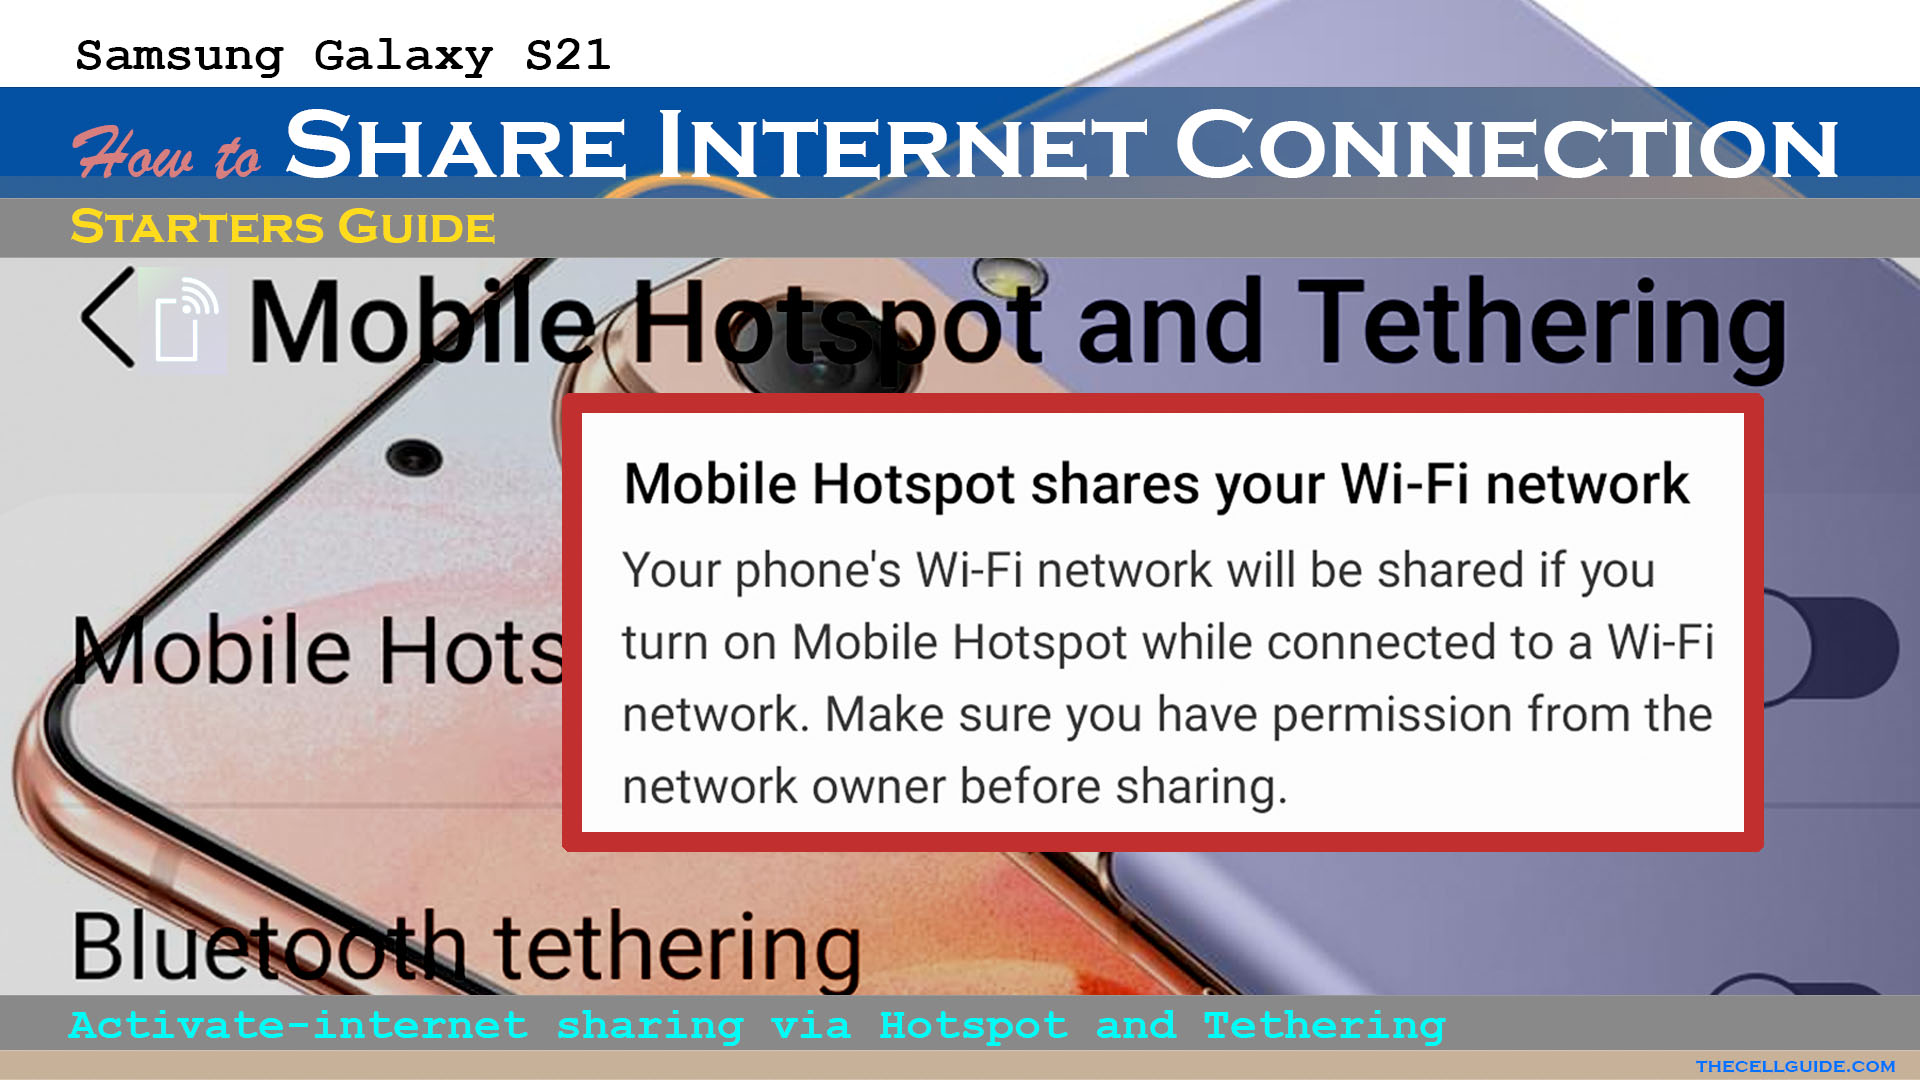 Forensische geneeskunde Trouwens advies How to Share Galaxy S21 Wi-Fi Internet via Mobile Hotspot and Tethering